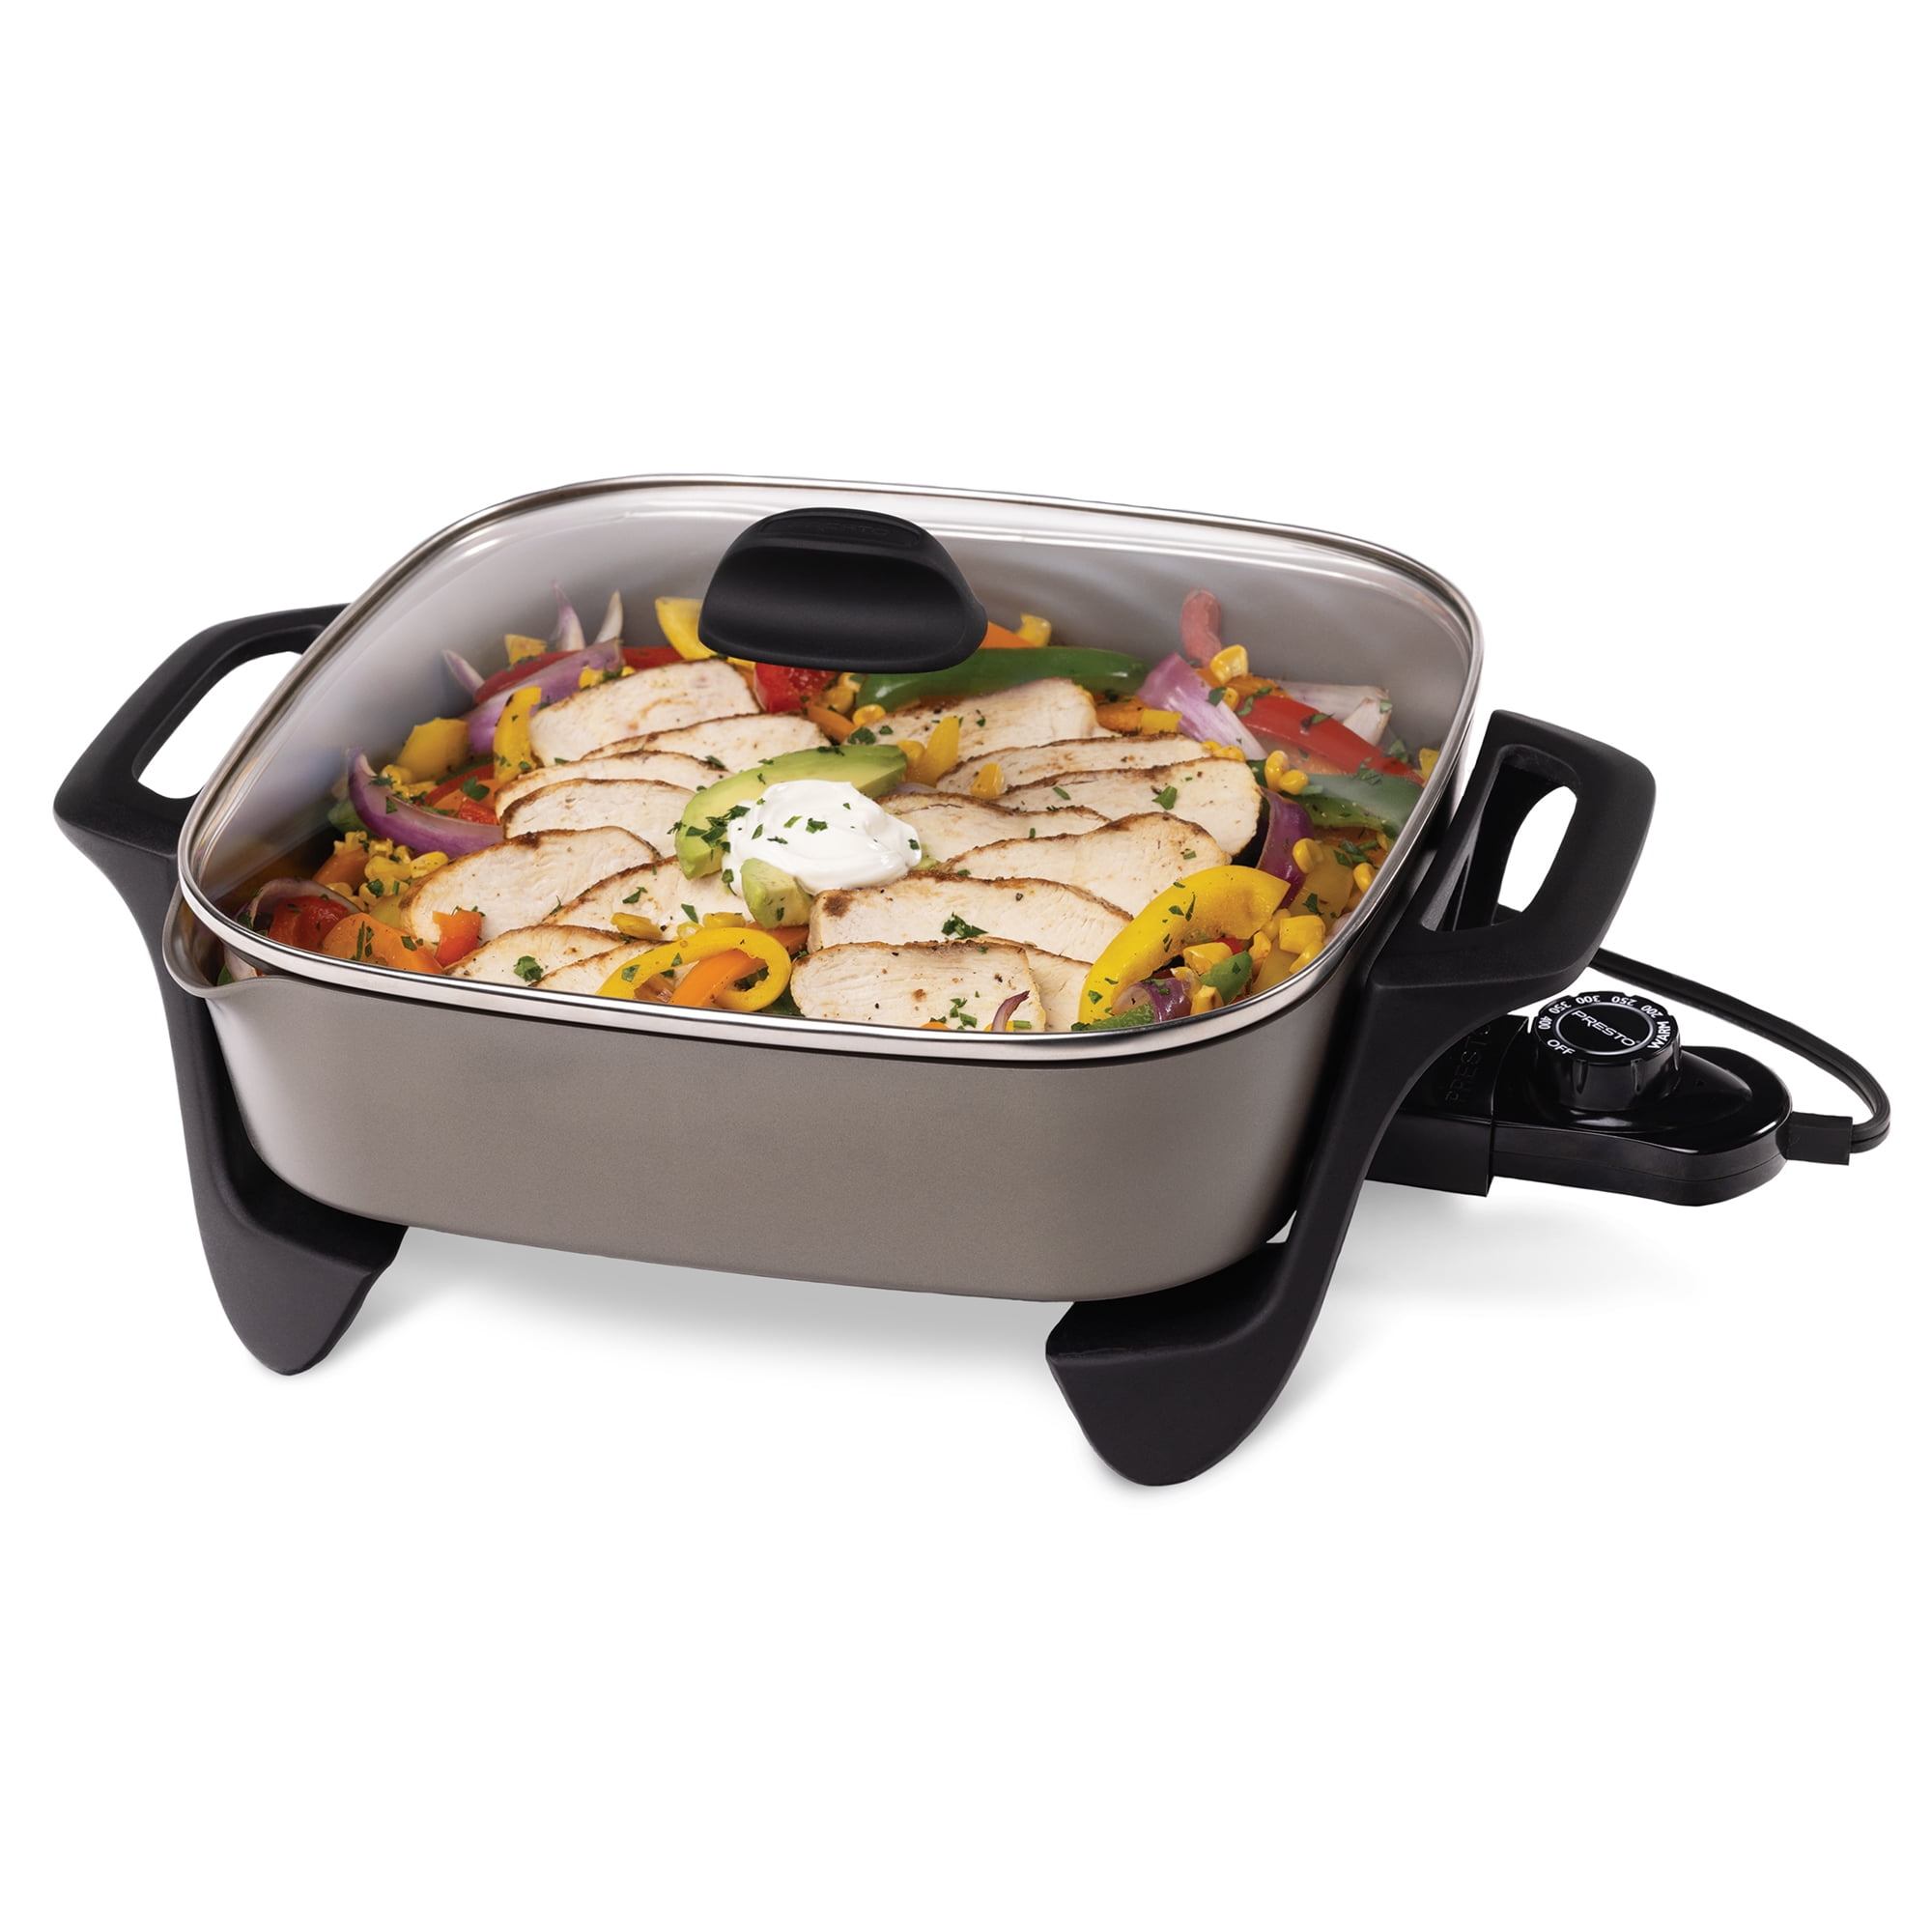  16-Inch Large Electric Skillet Nonstick with Glass Lid, Serves  6 to 8 People (10-Quart), Frying Pan for Roast, Bake,Stew, Adjustable  Temperature Control, Black: Home & Kitchen